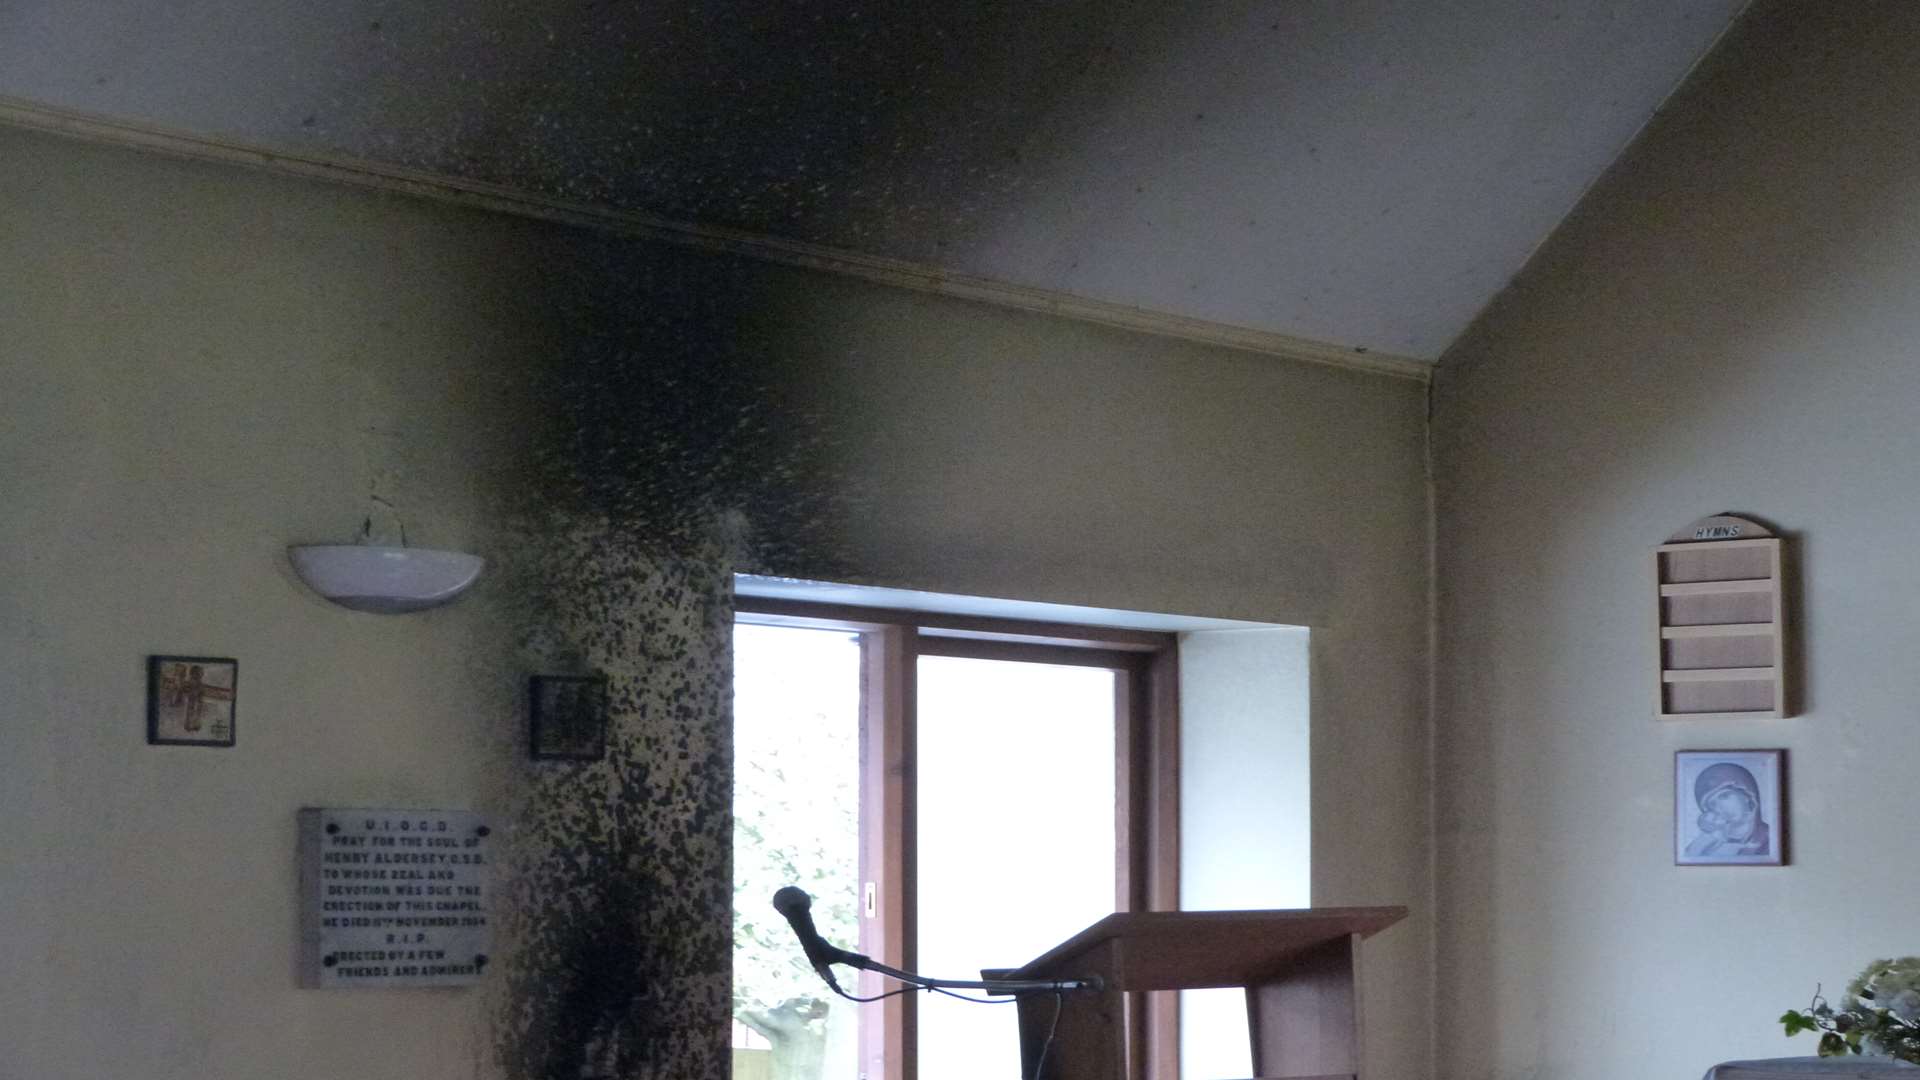 The wall was damaged by the smoke